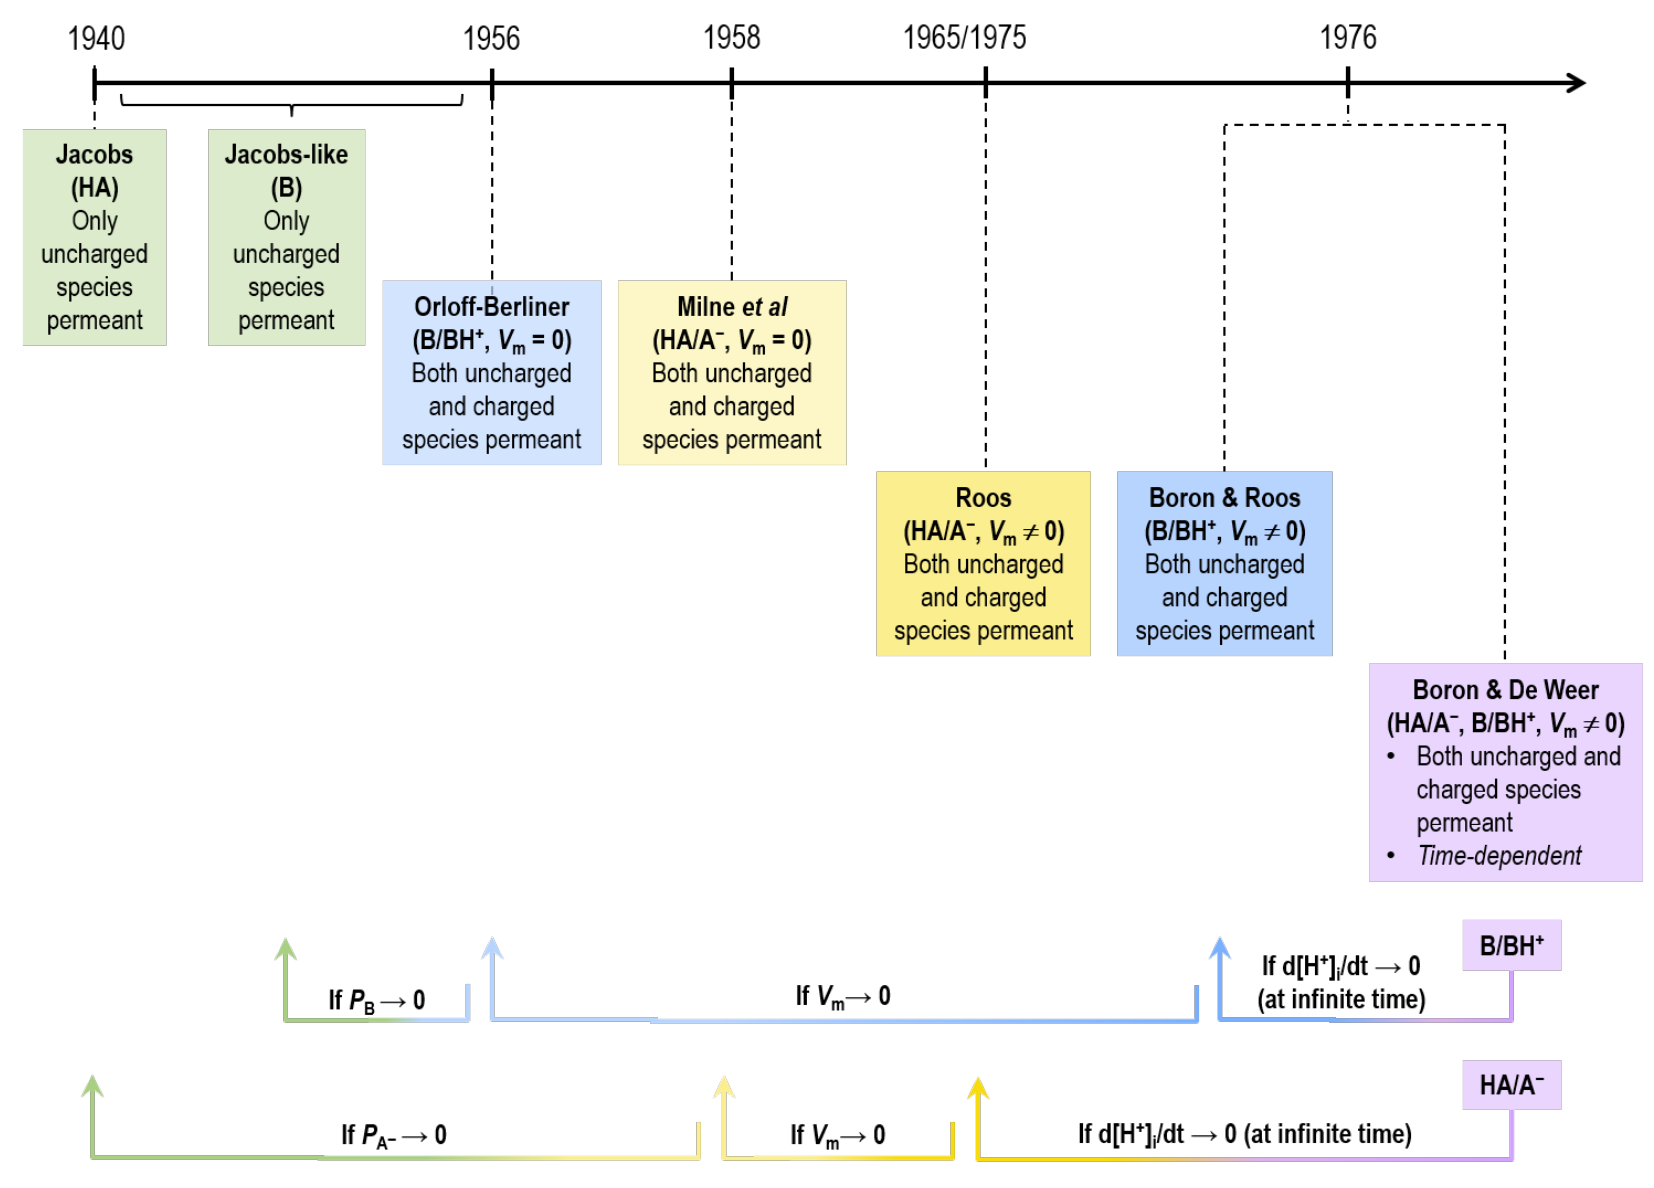 Timeline of acid-base/\mathrm{pH} models prior to BDW. Note that the time-dependent BDW model of weak acid/conjugate weak base (\mathrm{HA}/\mathrm{A^-}) collapses to  steady-state model for \mathrm{HA}/\mathrm{A^-}. The  model, in turn, reduces to the  model for \mathrm{HA}/\mathrm{A^-} when the membrane potential (V_\mathrm{m}) approaches zero. Finally, the  model reduces to the  model — where only one uncharged species \mathrm{HA} is permeant — as the permeability of \mathrm{A^-} (P_\mathrm{A^-}) approaches zero. Similarly, the time-dependent BDW model of weak base/conjugate weak acid (\mathrm{B}/\mathrm{BH^+}) collapses to  steady-state model for \mathrm{B}/\mathrm{BH^+}. The  model in turn reduces to the  model for \mathrm{B}/\mathrm{BH^+} when V_\mathrm{m} approaches zero. Finally, the  model reduces to the Jacobs-like model — where only one uncharged species \mathrm{B} is permeant — as (P_\mathrm{B}) approaches zero.